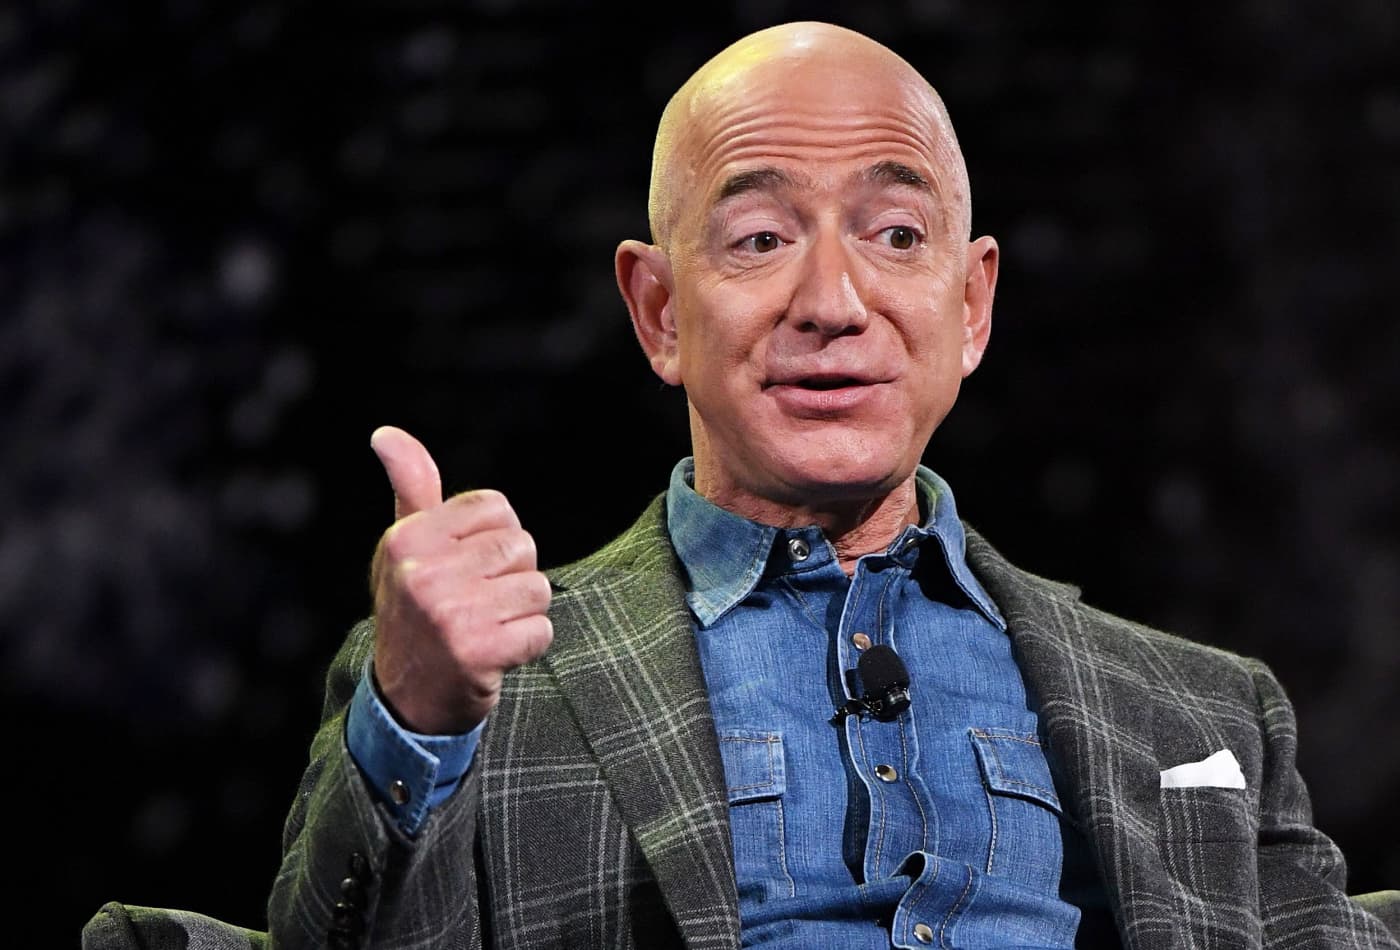 Jeff Bezos can afford to buy every NFL team